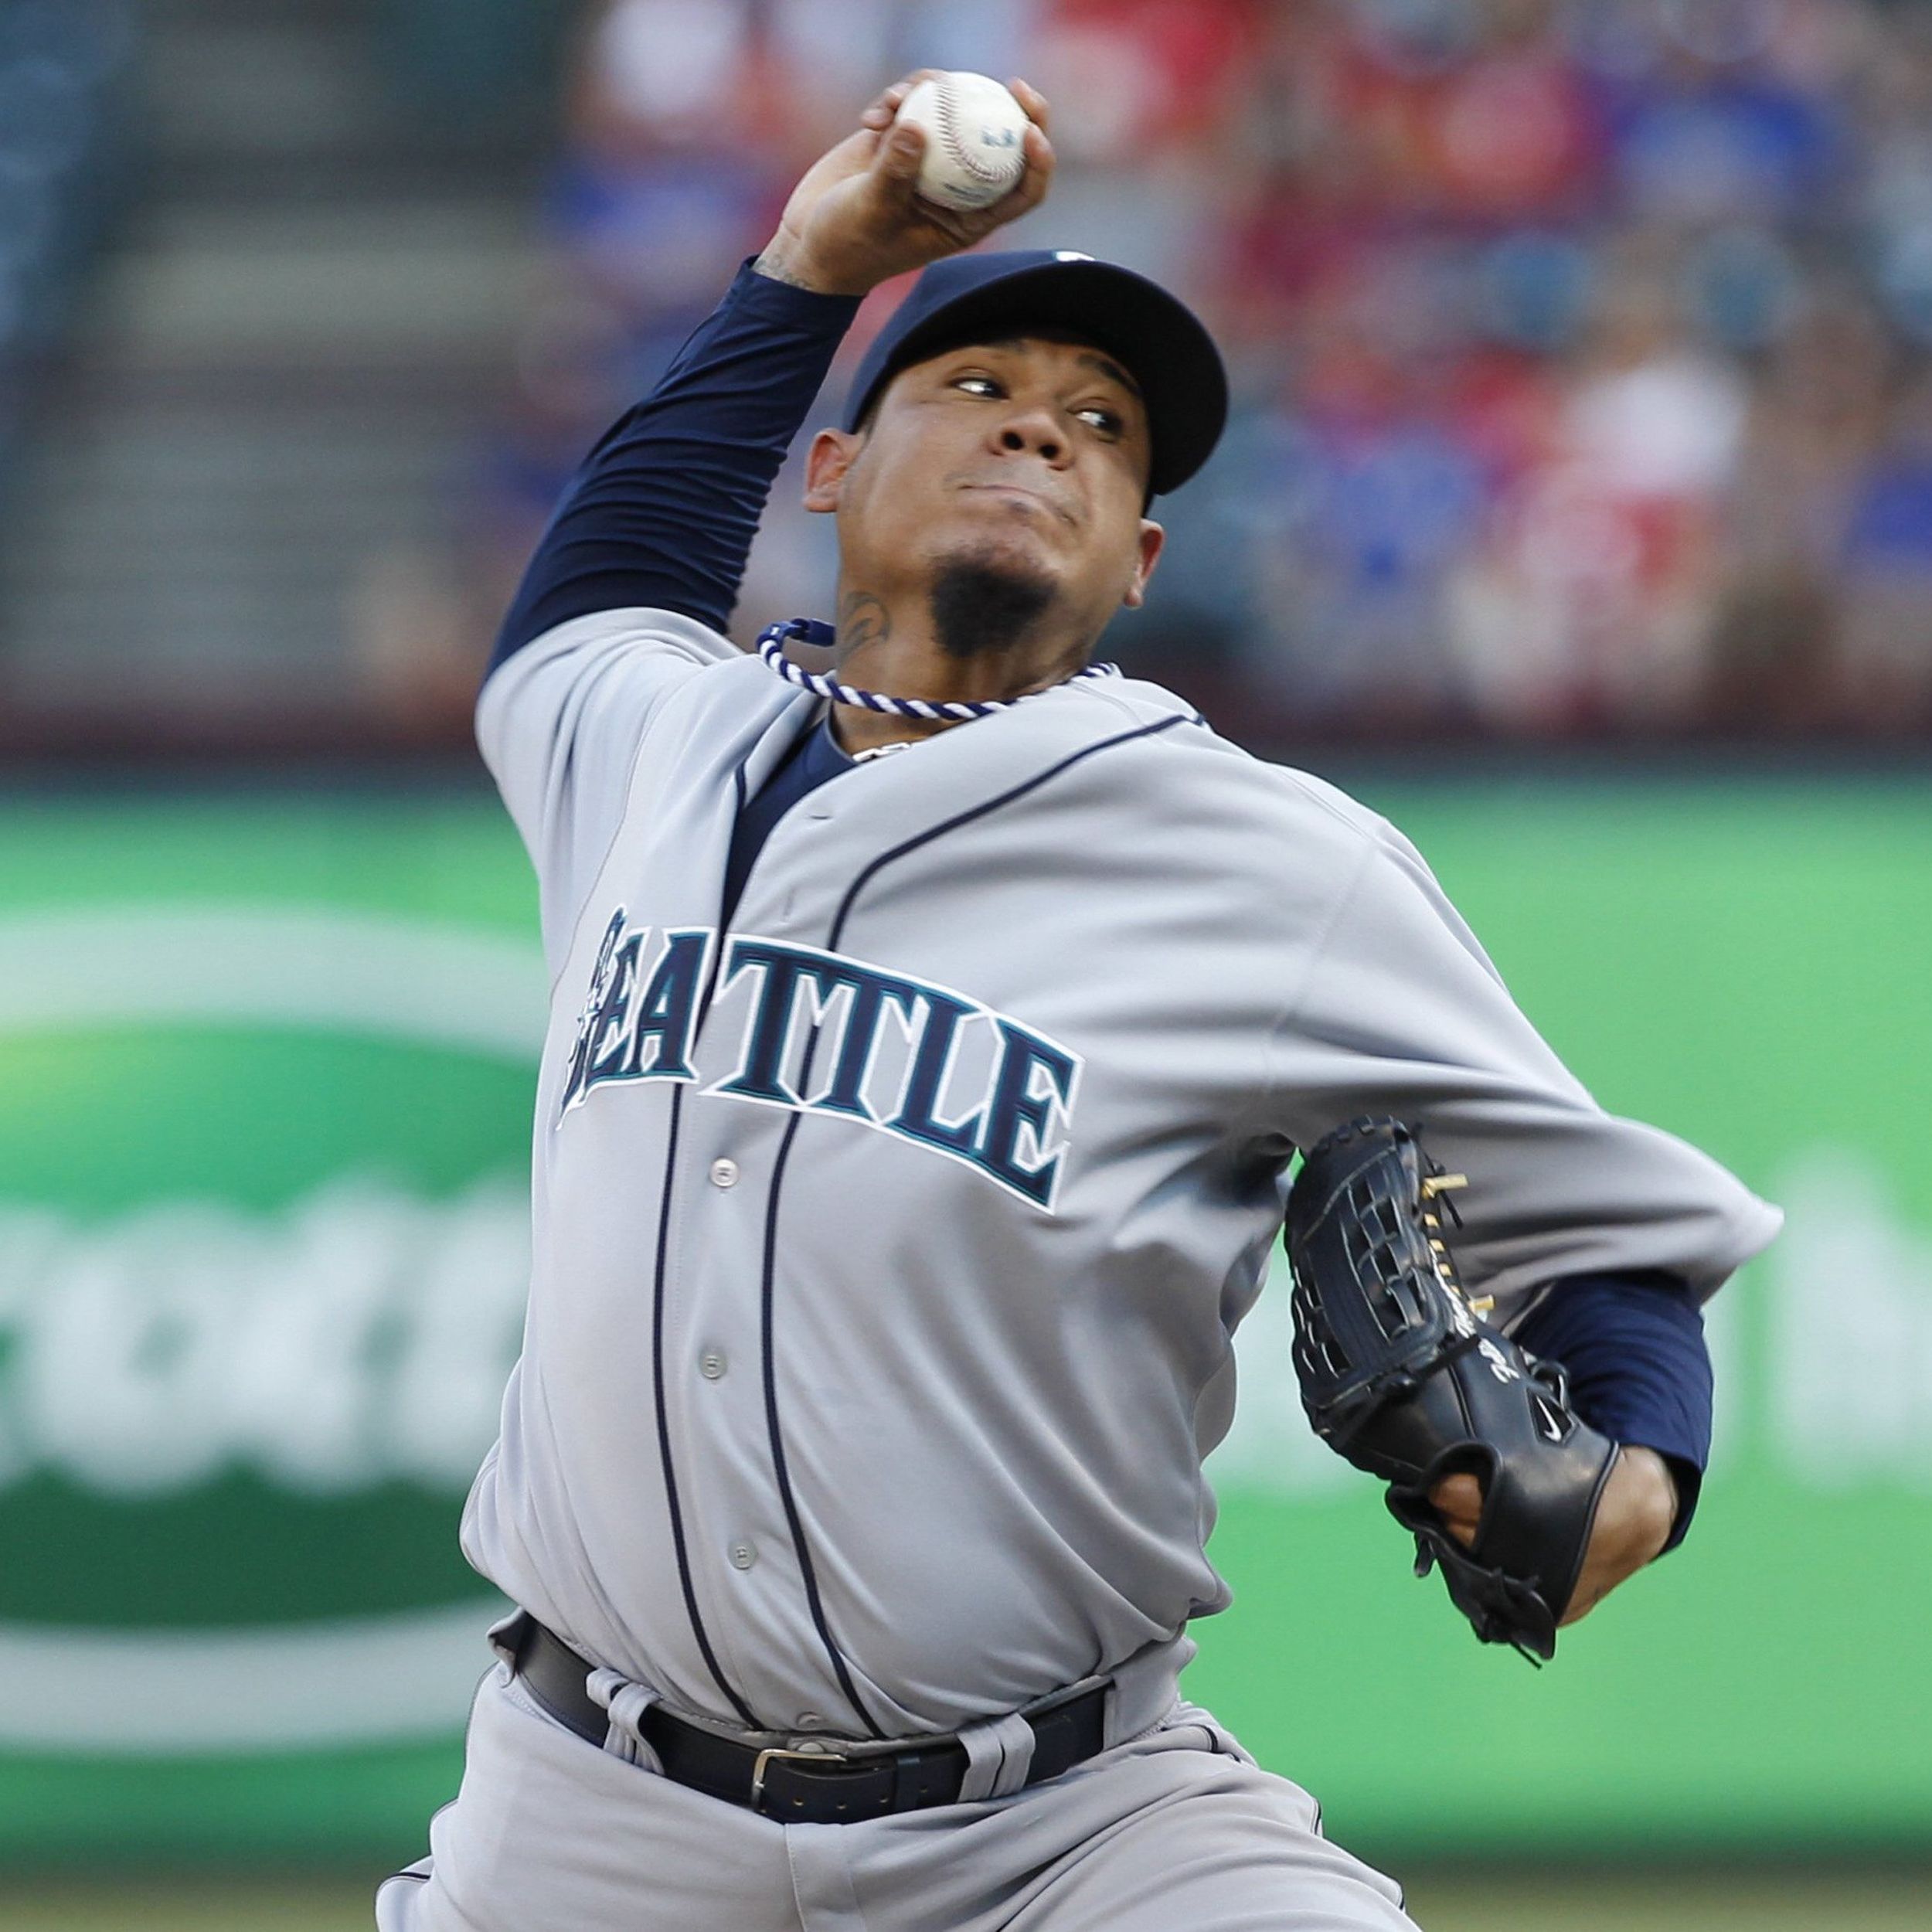 A sad Mariners tale: After years of Felix Hernandez waiting on his